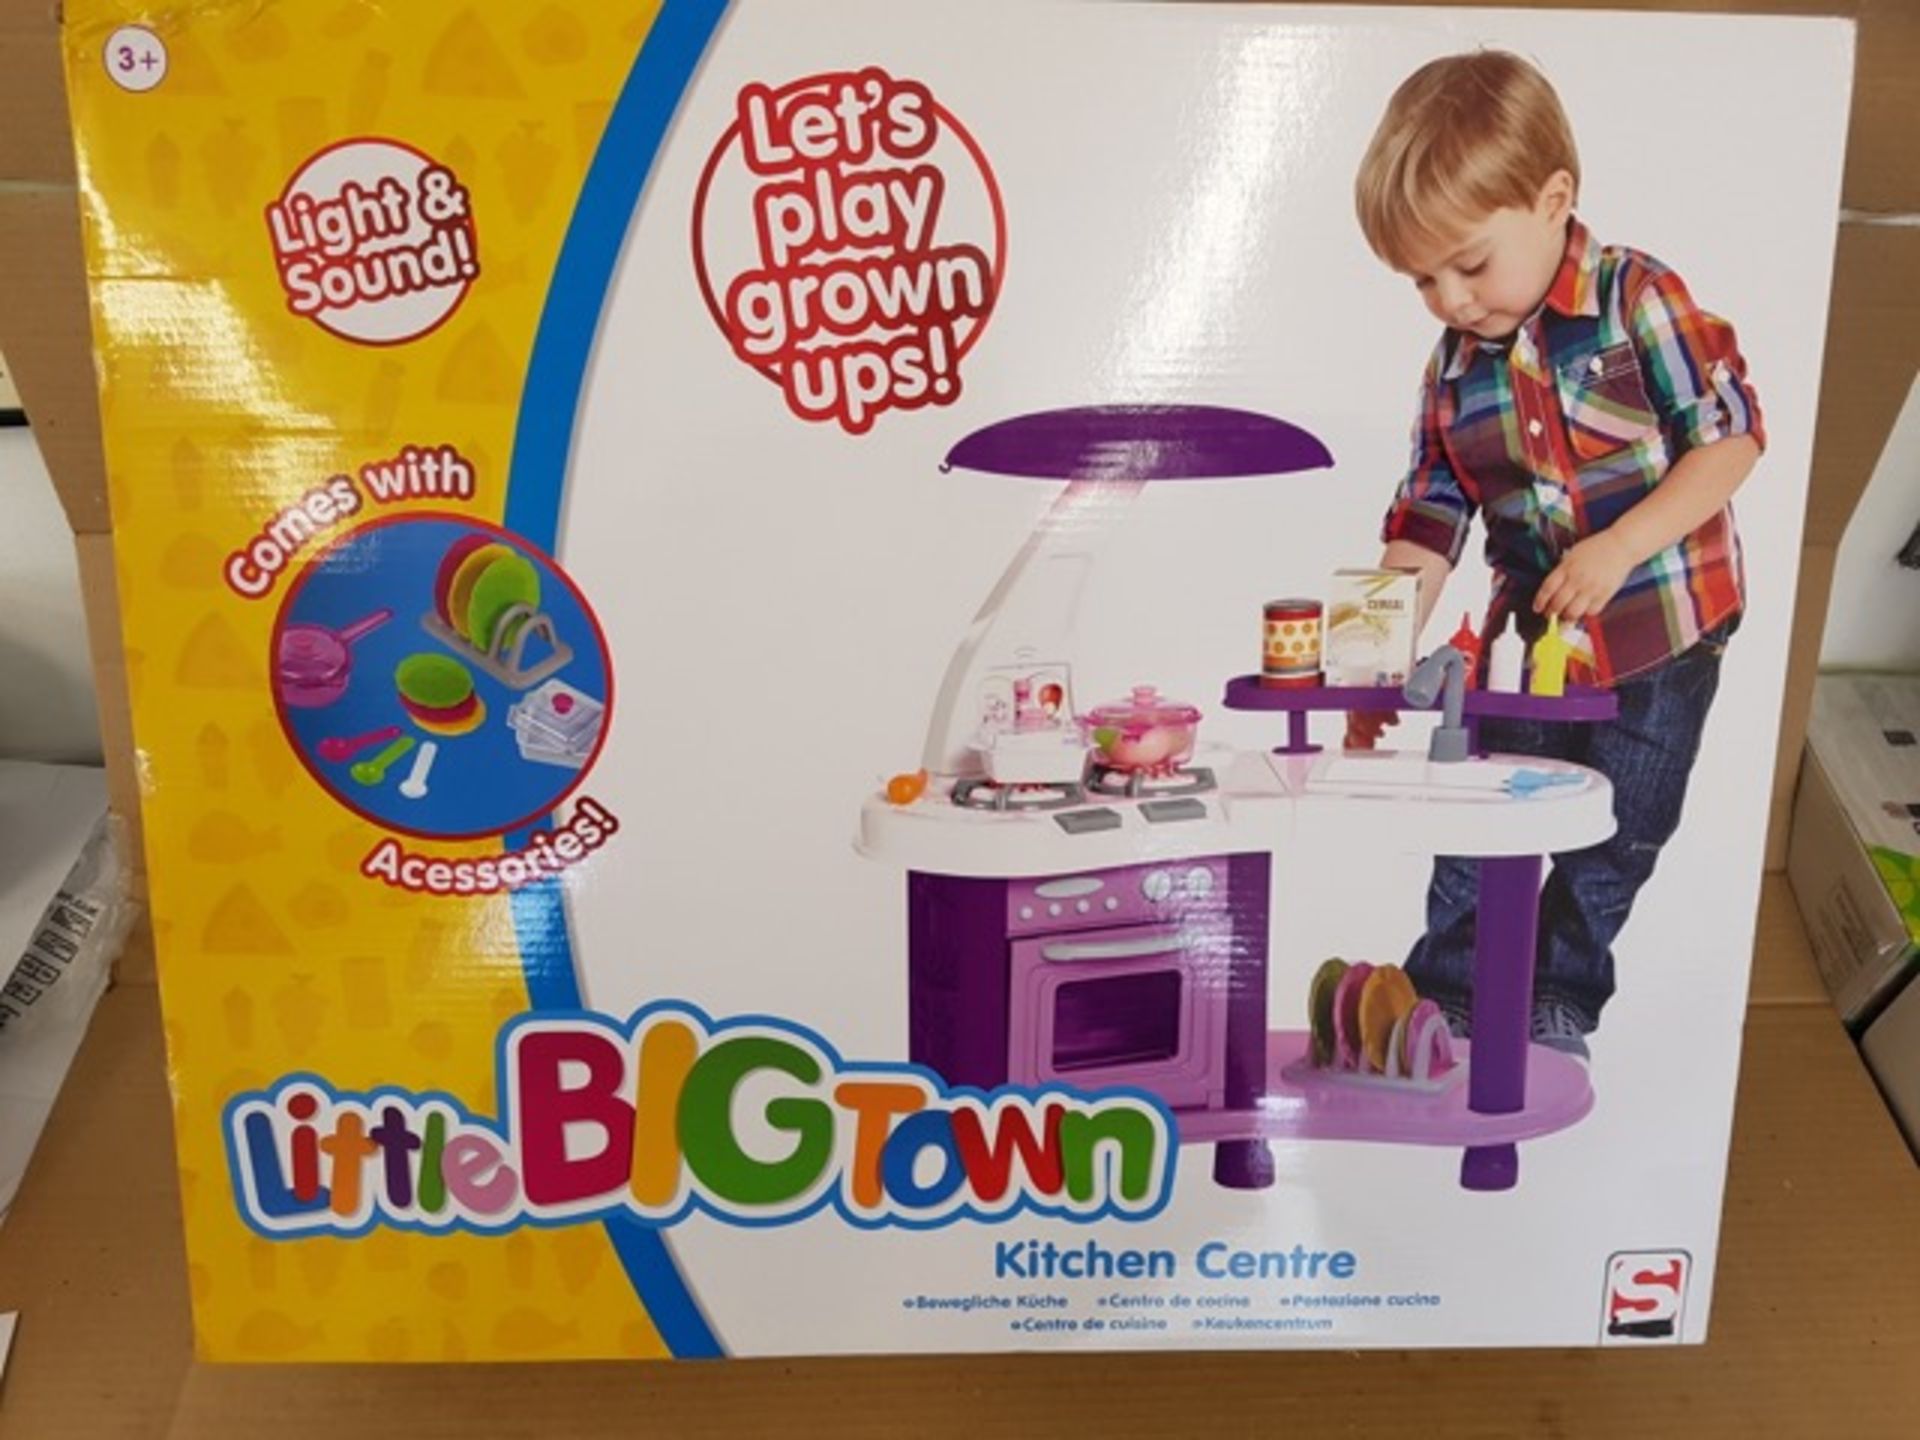 6 x Brand New Little Big Town Large Kitchen Center Play Set's. RRP £49.99 each. Comes with all